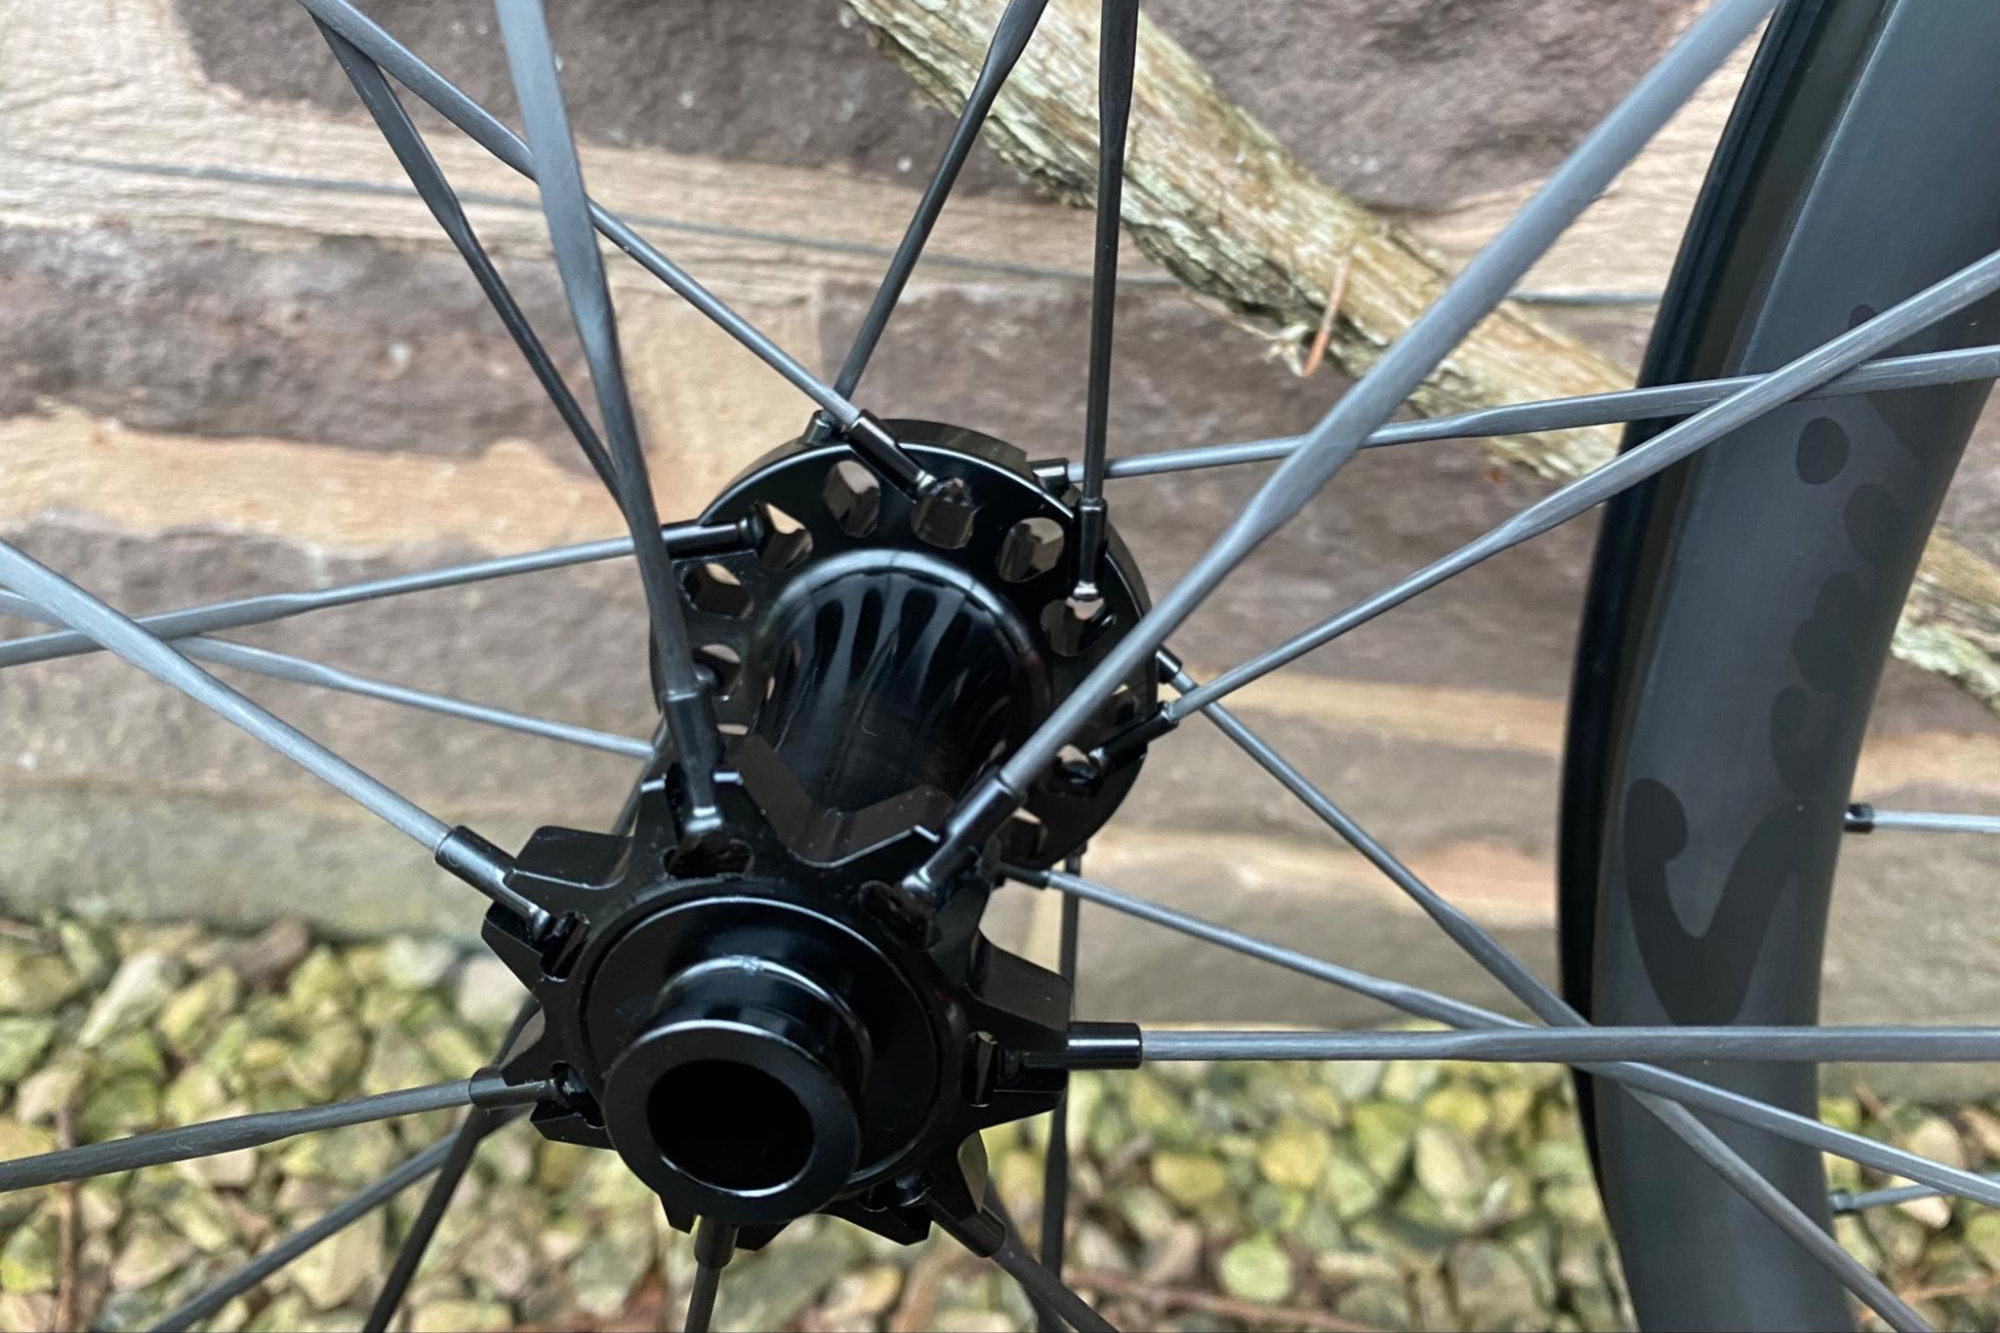 Image shows the Scribe Élan Wide+ 32-D Wheelset